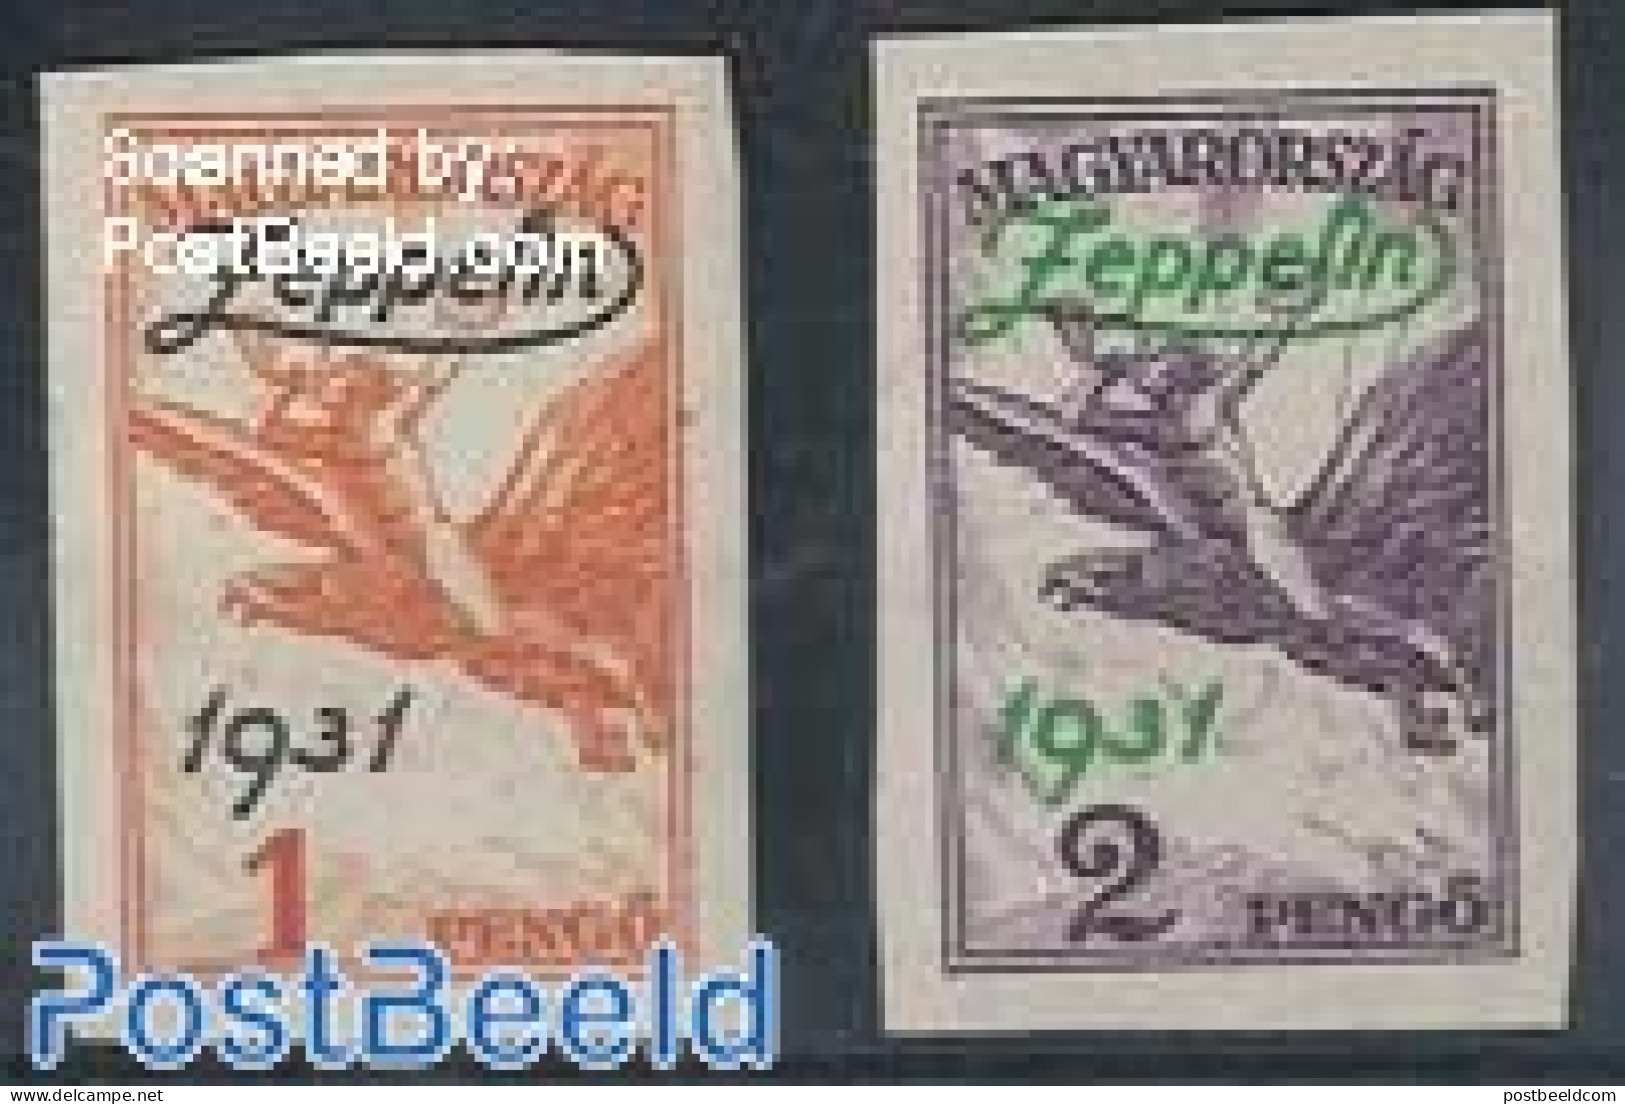 Hungary 1931 Zeppelin Overprints 2v, Imperforated, Mint NH - Unused Stamps